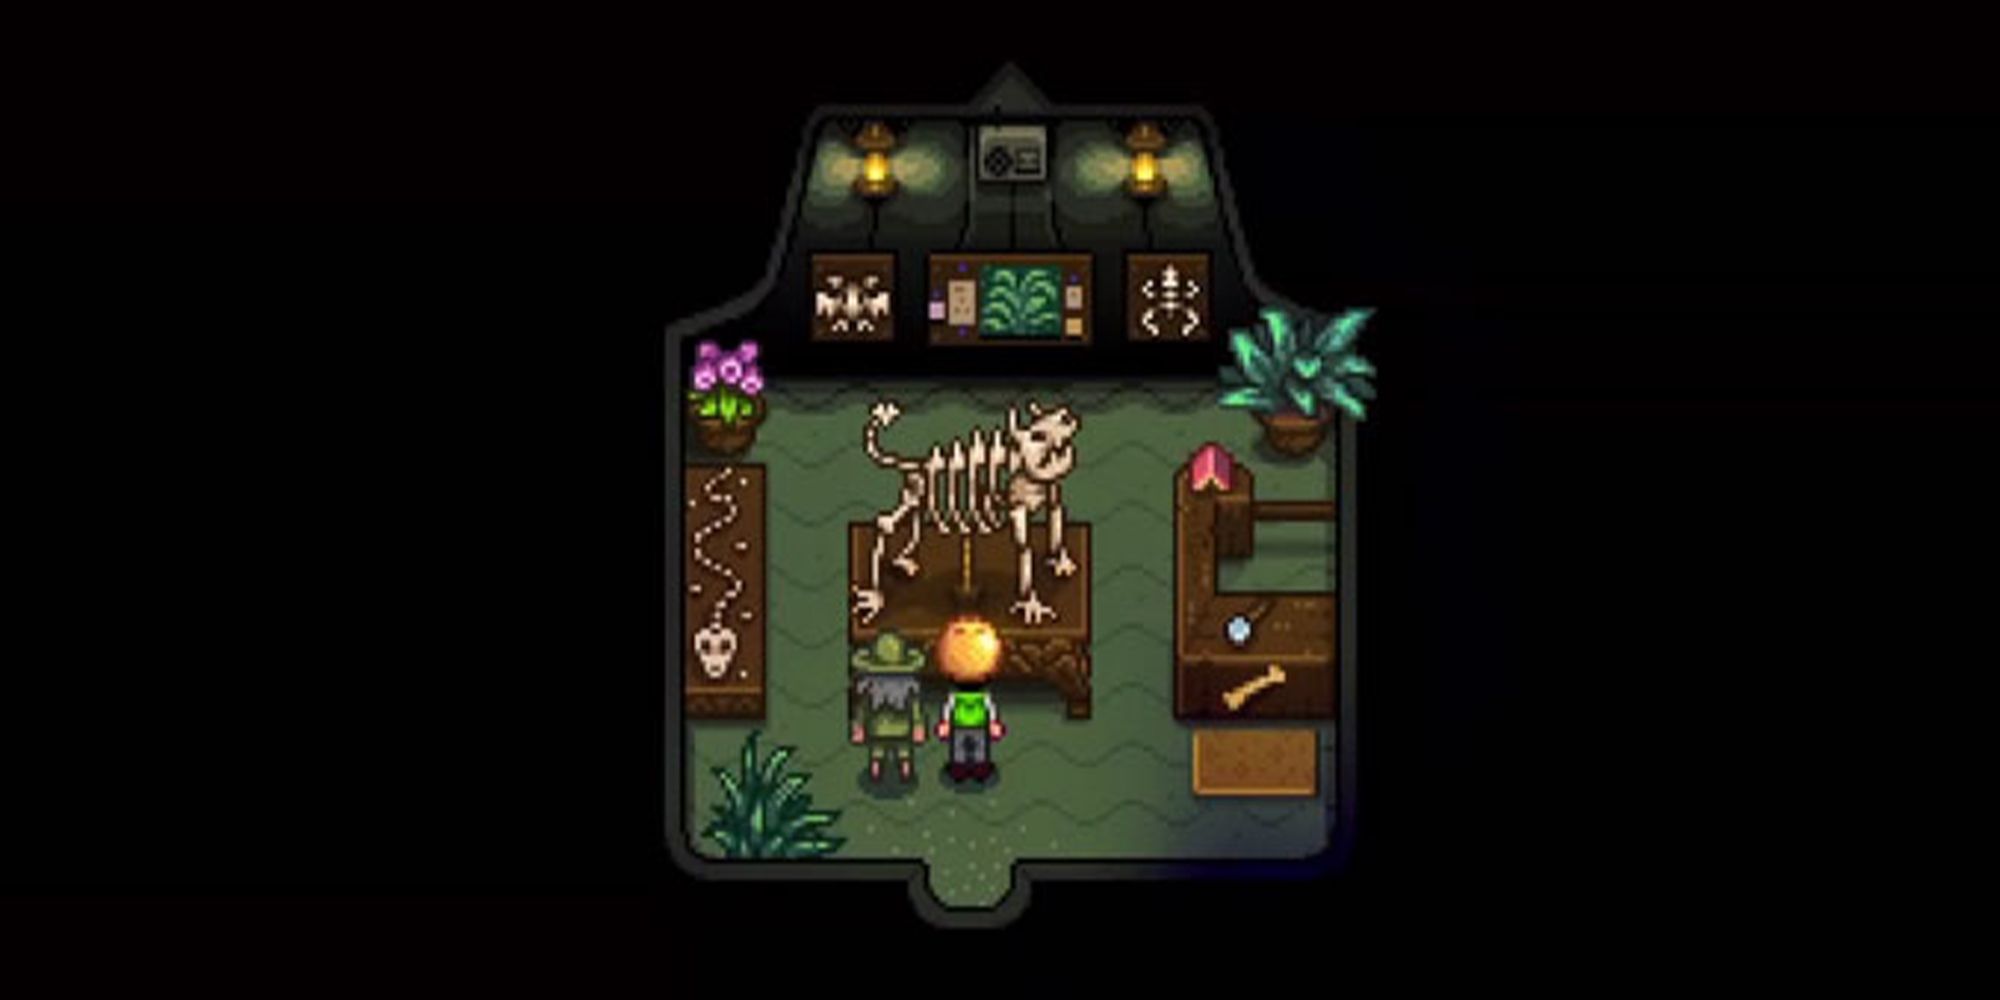 Where to Find Professor Snail in Stardew Valley